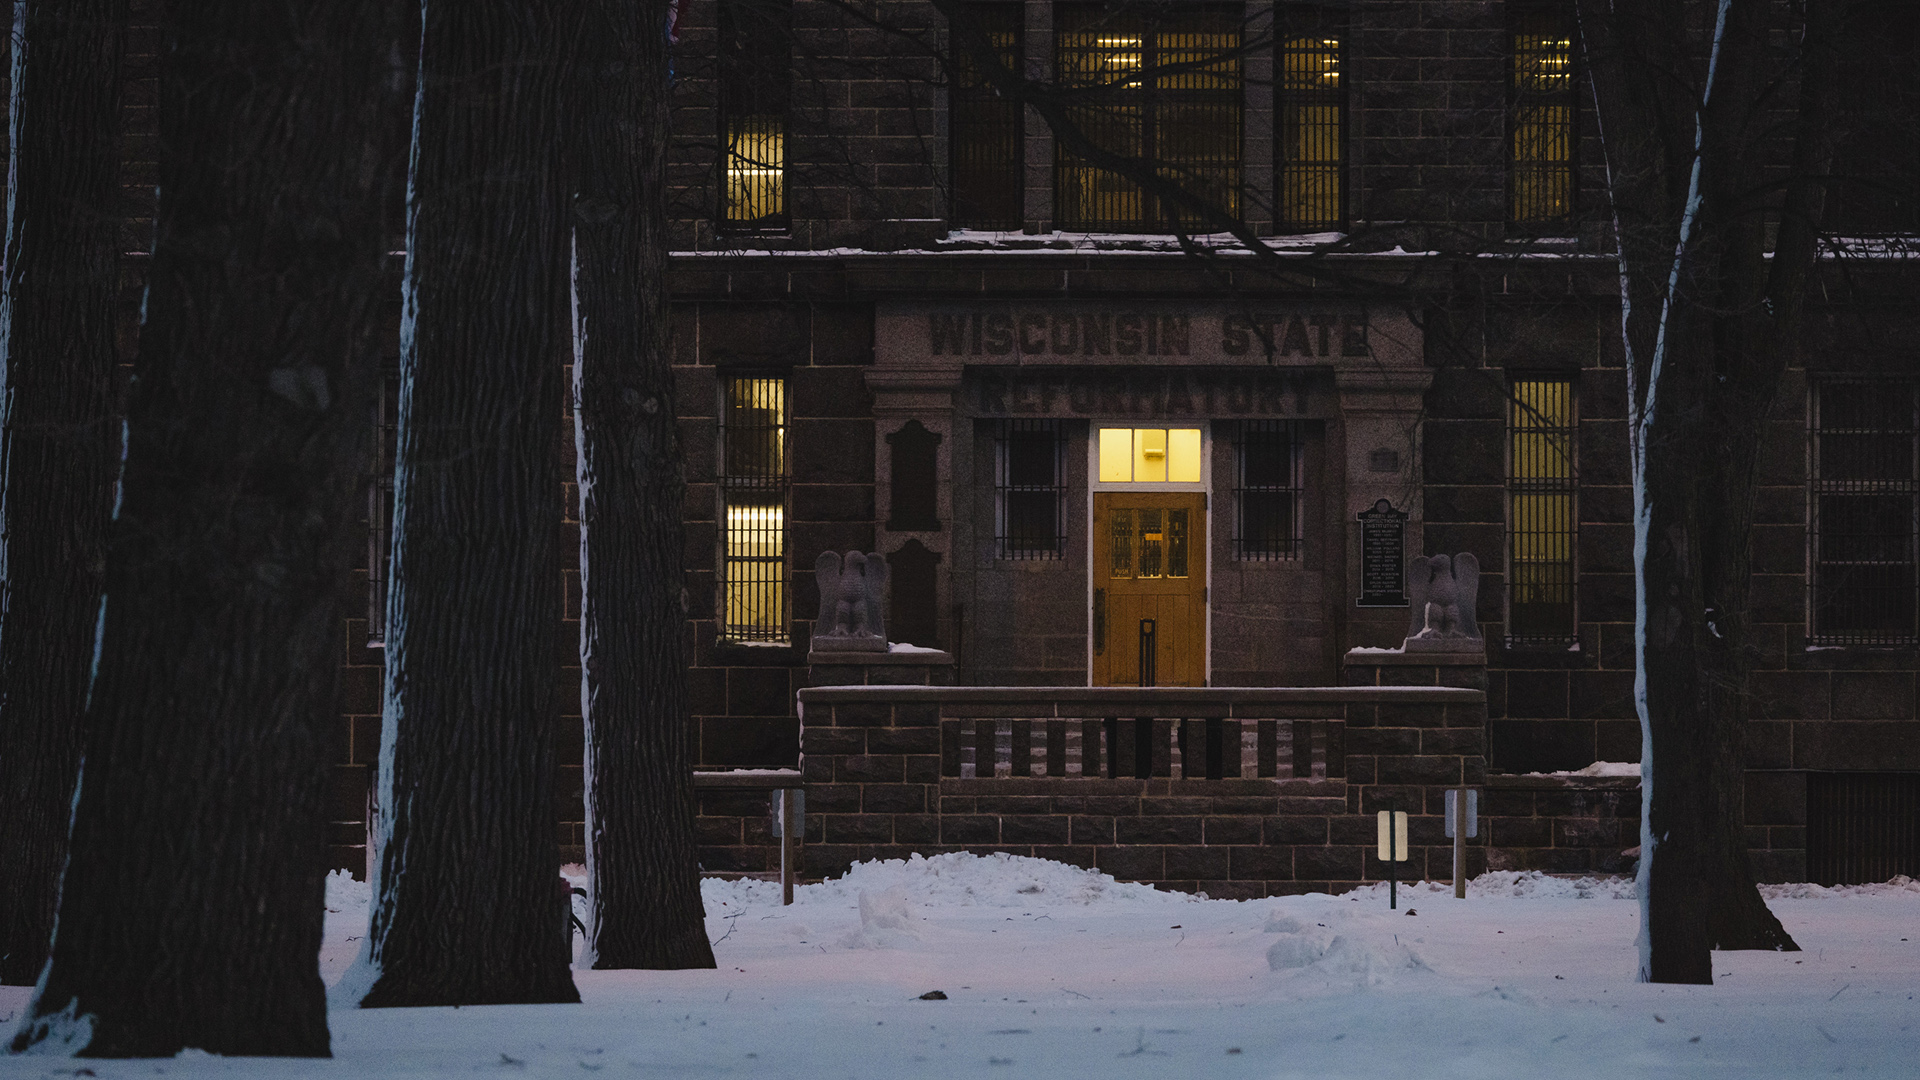 Light illuminates the interior to the entrance of a stone masonry building with a wood door and relief sign reading "Wisconsin State Reformatory," with light shining through bar-covered windows to either side and on a higher floor, with a snow-covered sidewalk and tree trunks in the foreground.